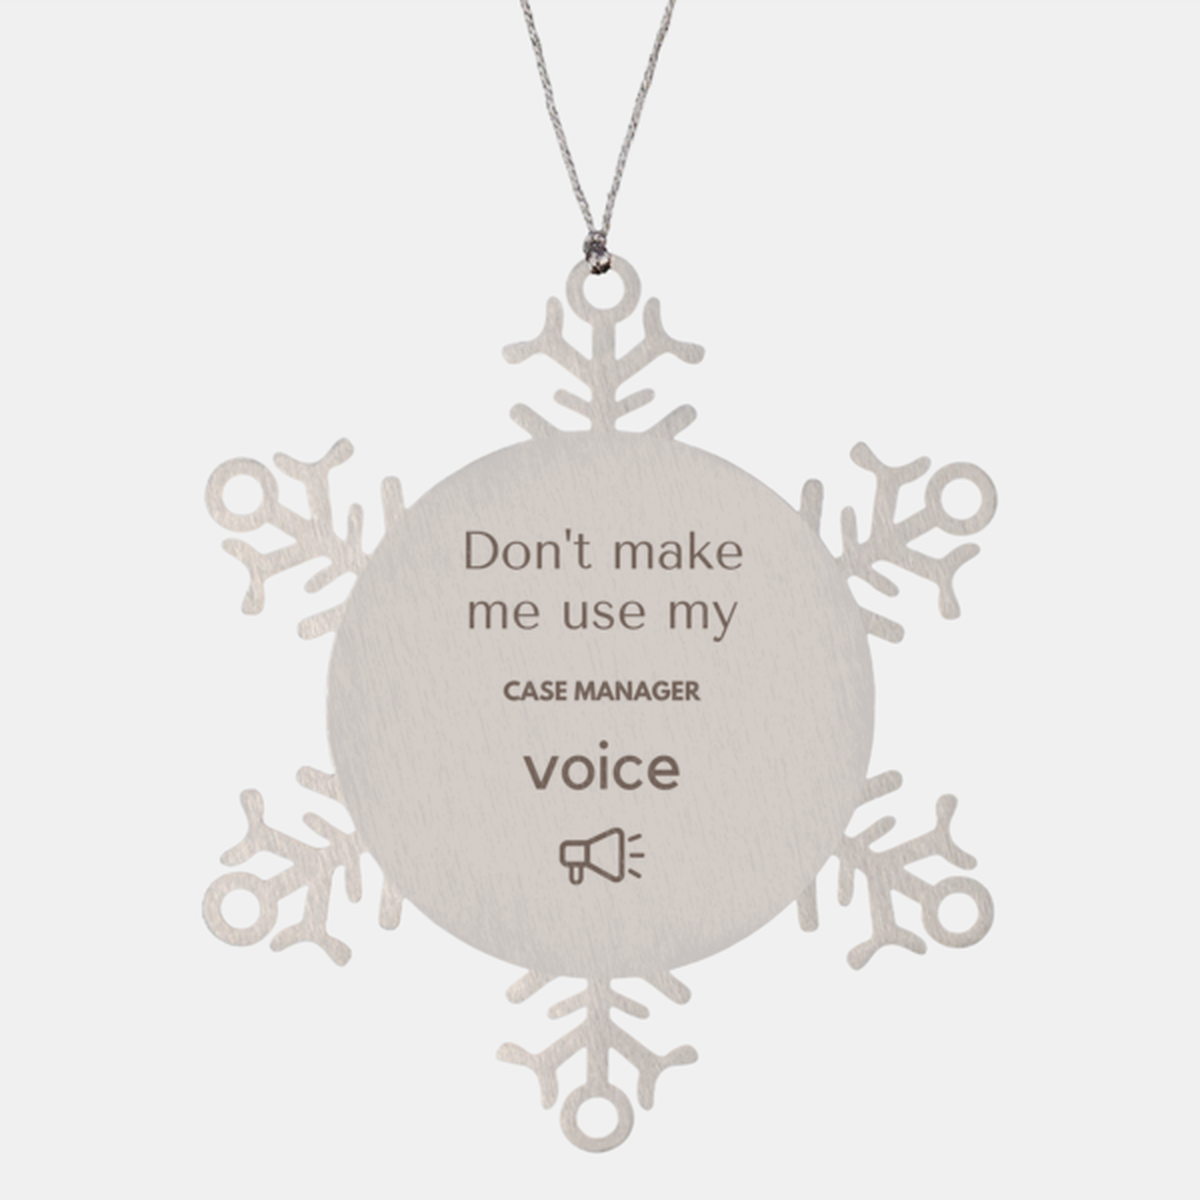 Don't make me use my Case Manager voice, Sarcasm Case Manager Ornament Gifts, Christmas Case Manager Snowflake Ornament Unique Gifts For Case Manager Coworkers, Men, Women, Colleague, Friends